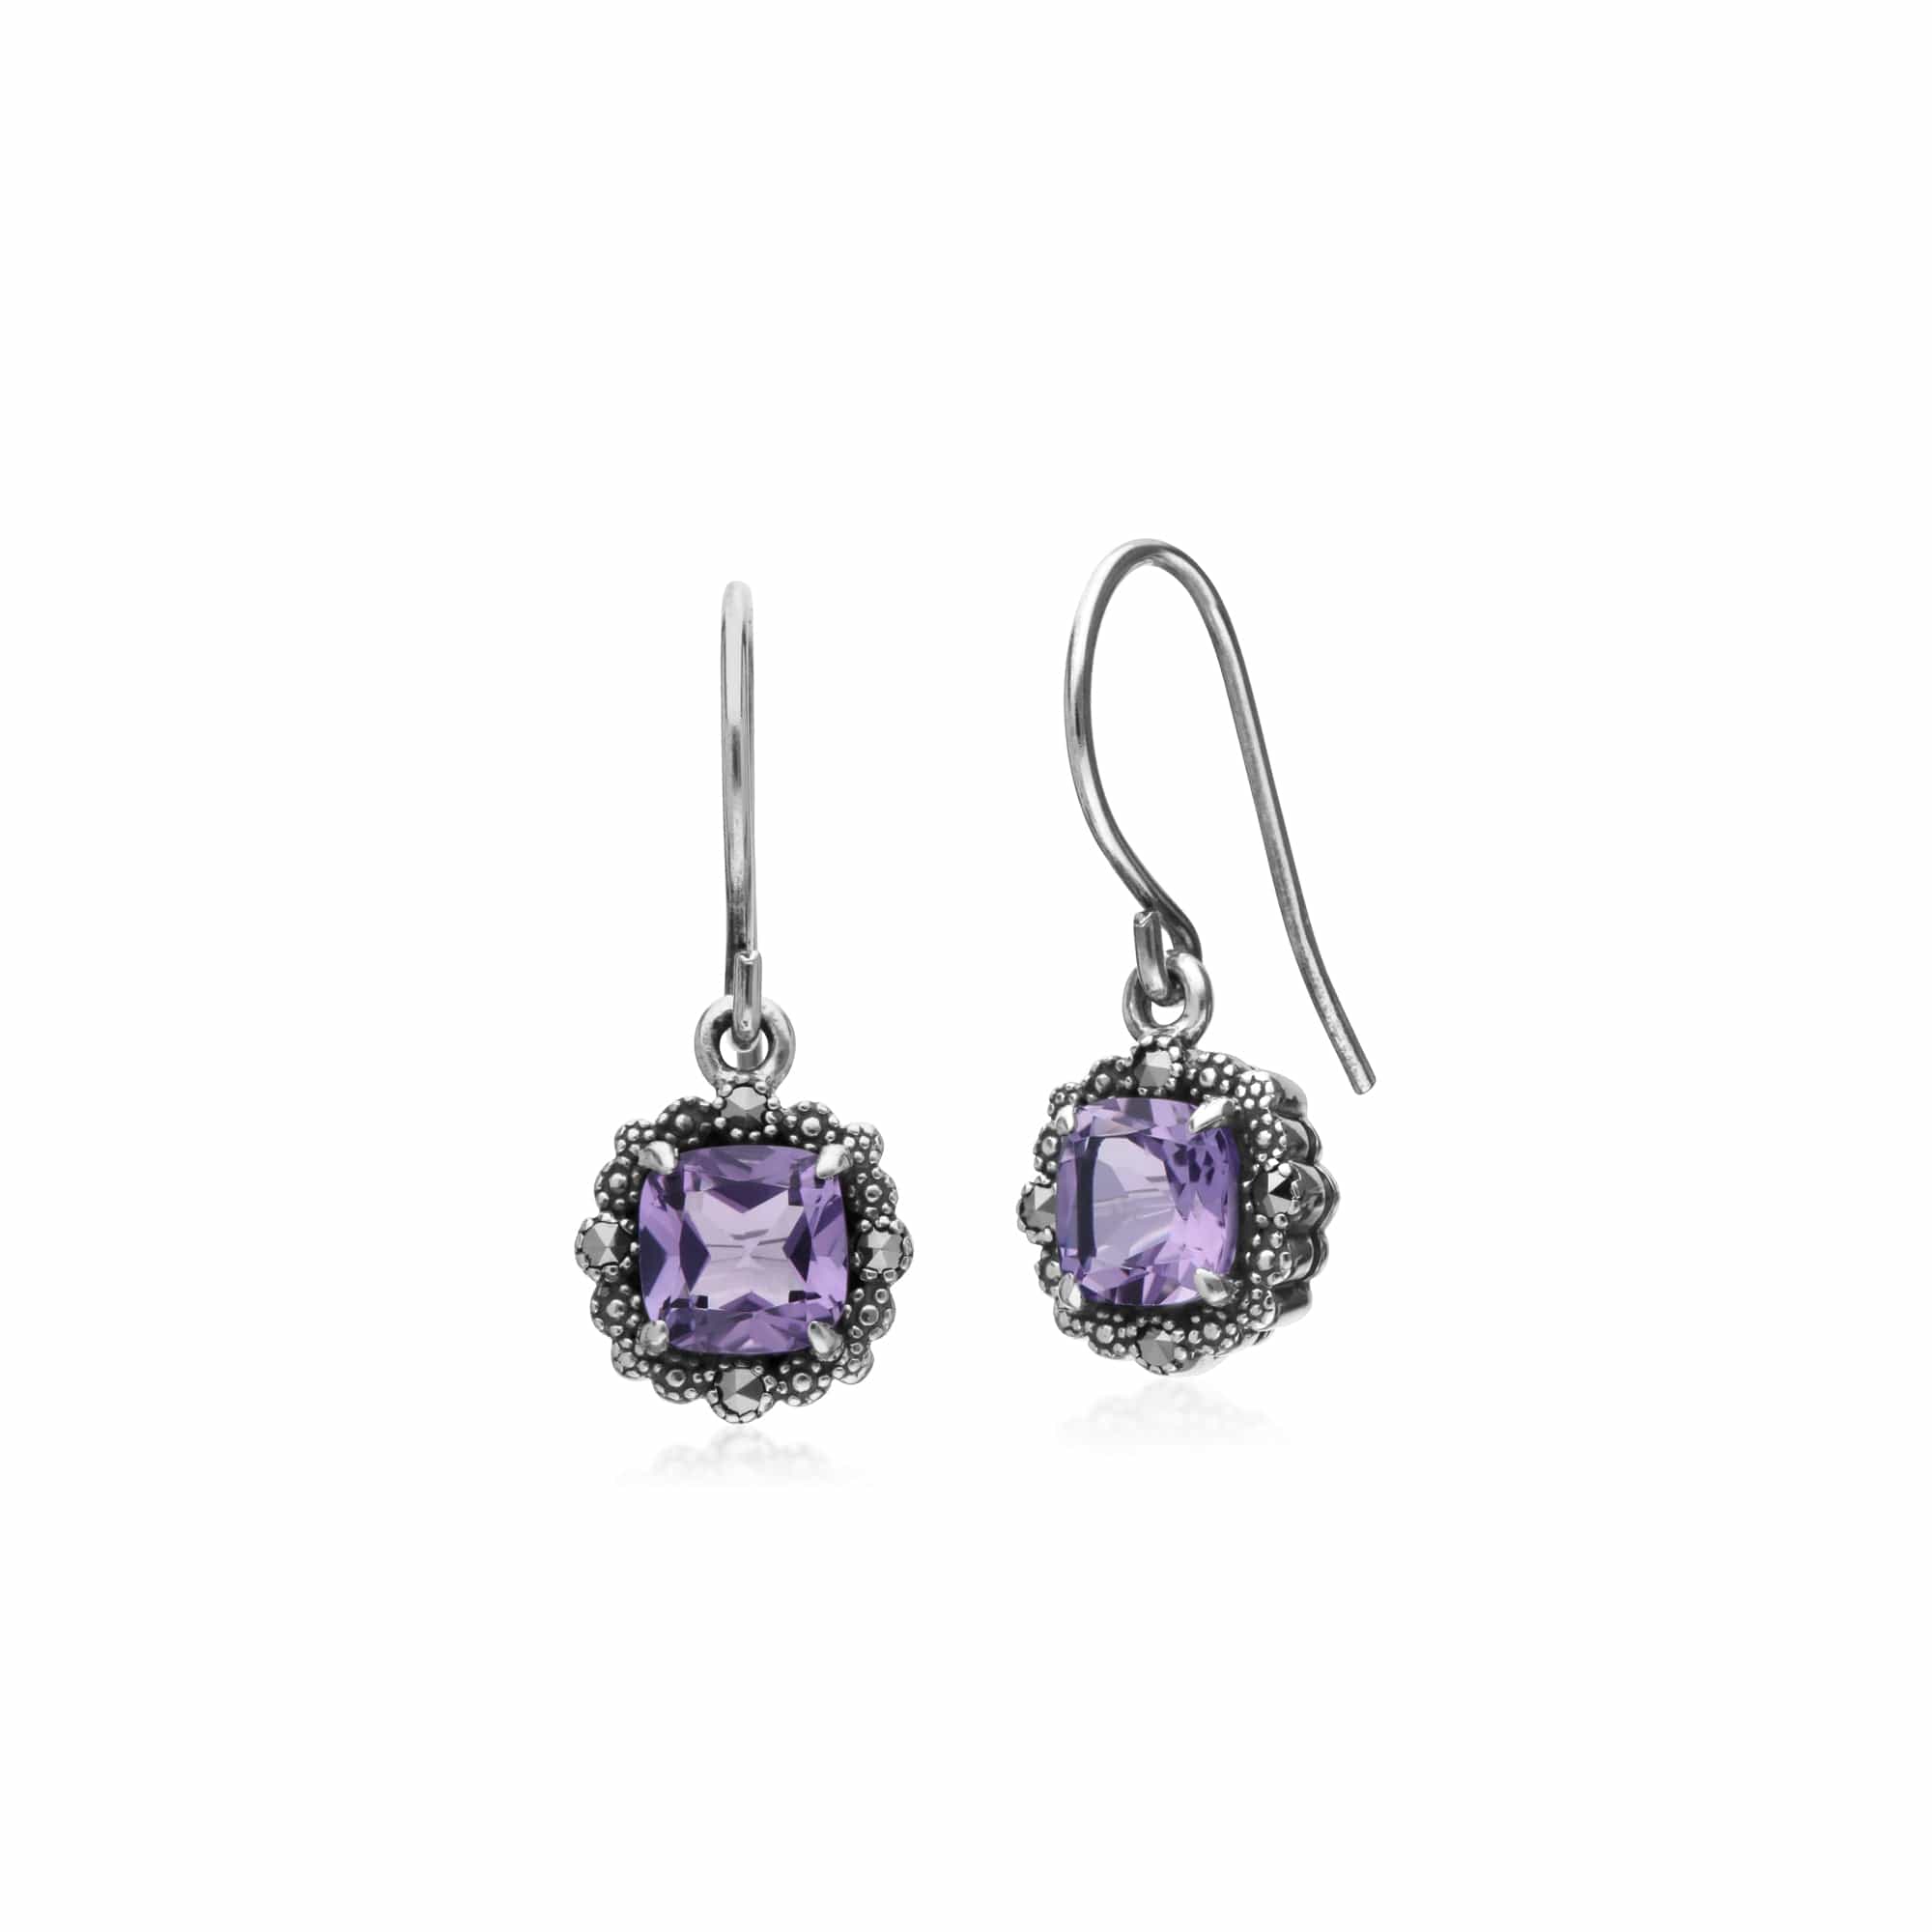 214E870902925 Art Deco Style Square Cushion Amethyst & Marcasite Drop Earrings in 925 Sterling Silver 2